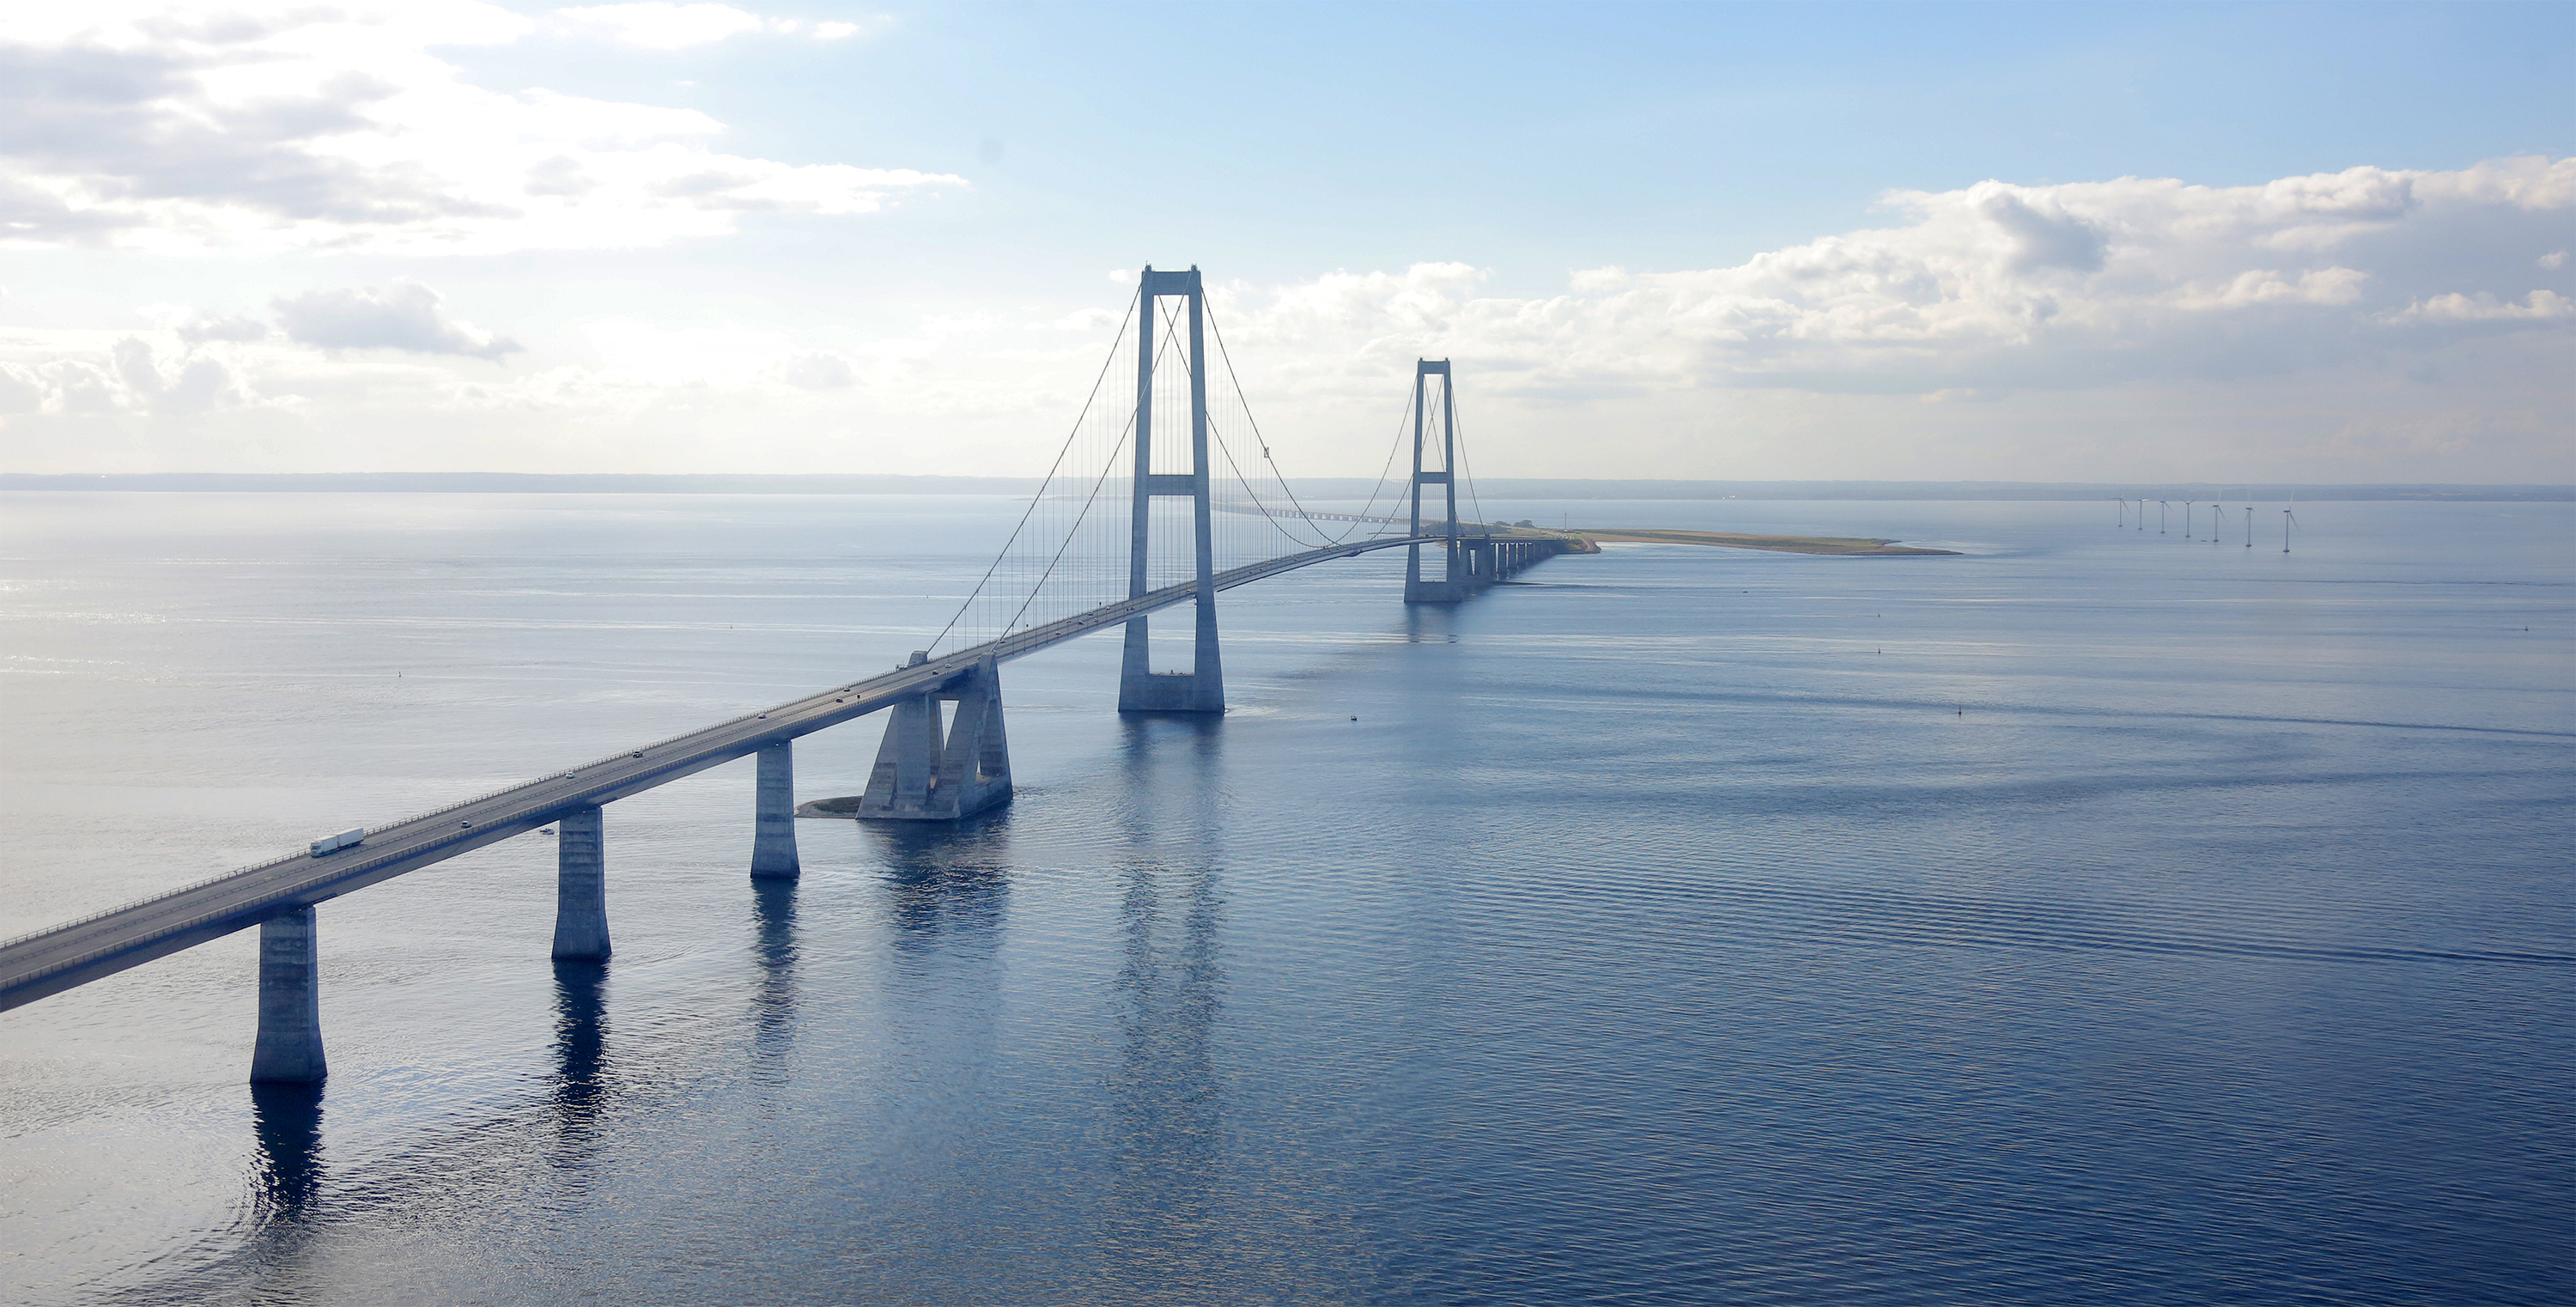 The Great Belt Bridge from the air